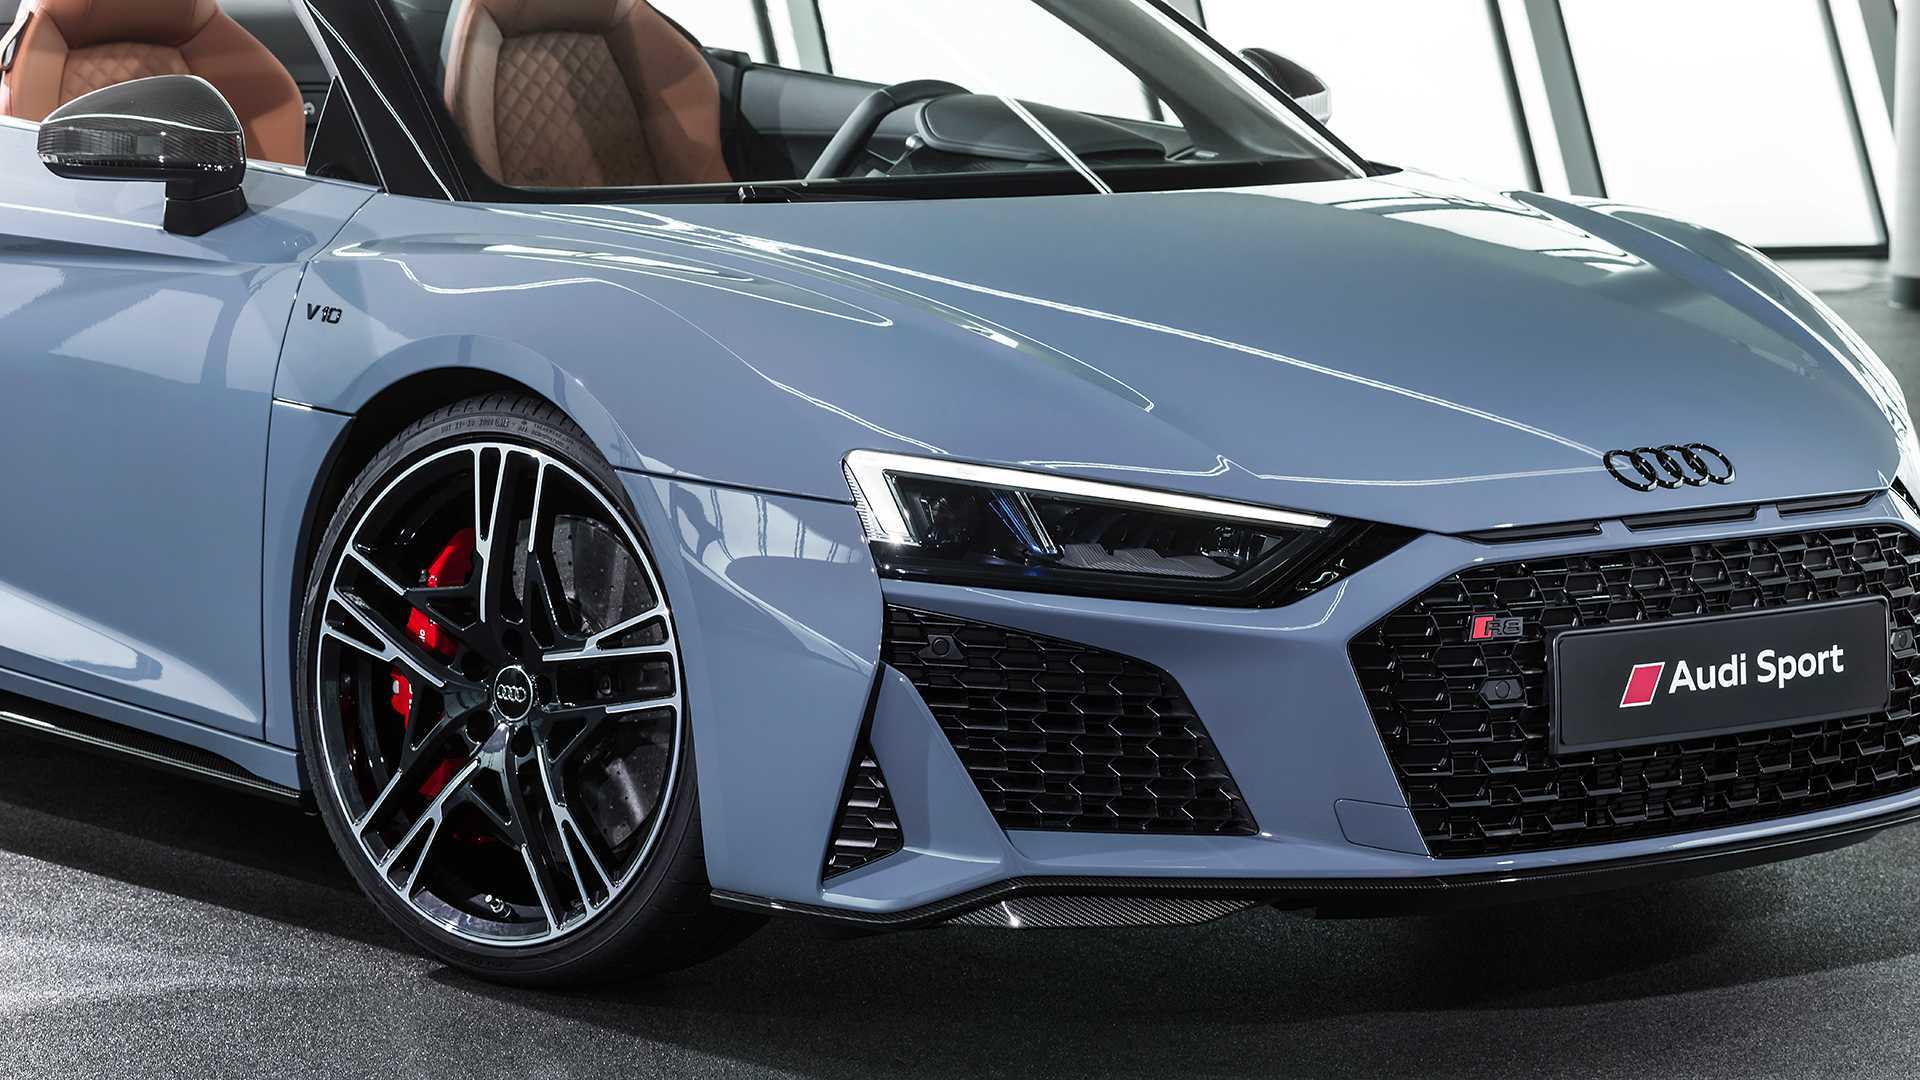 Audi R8 and R8 Spyder Photo Gallery